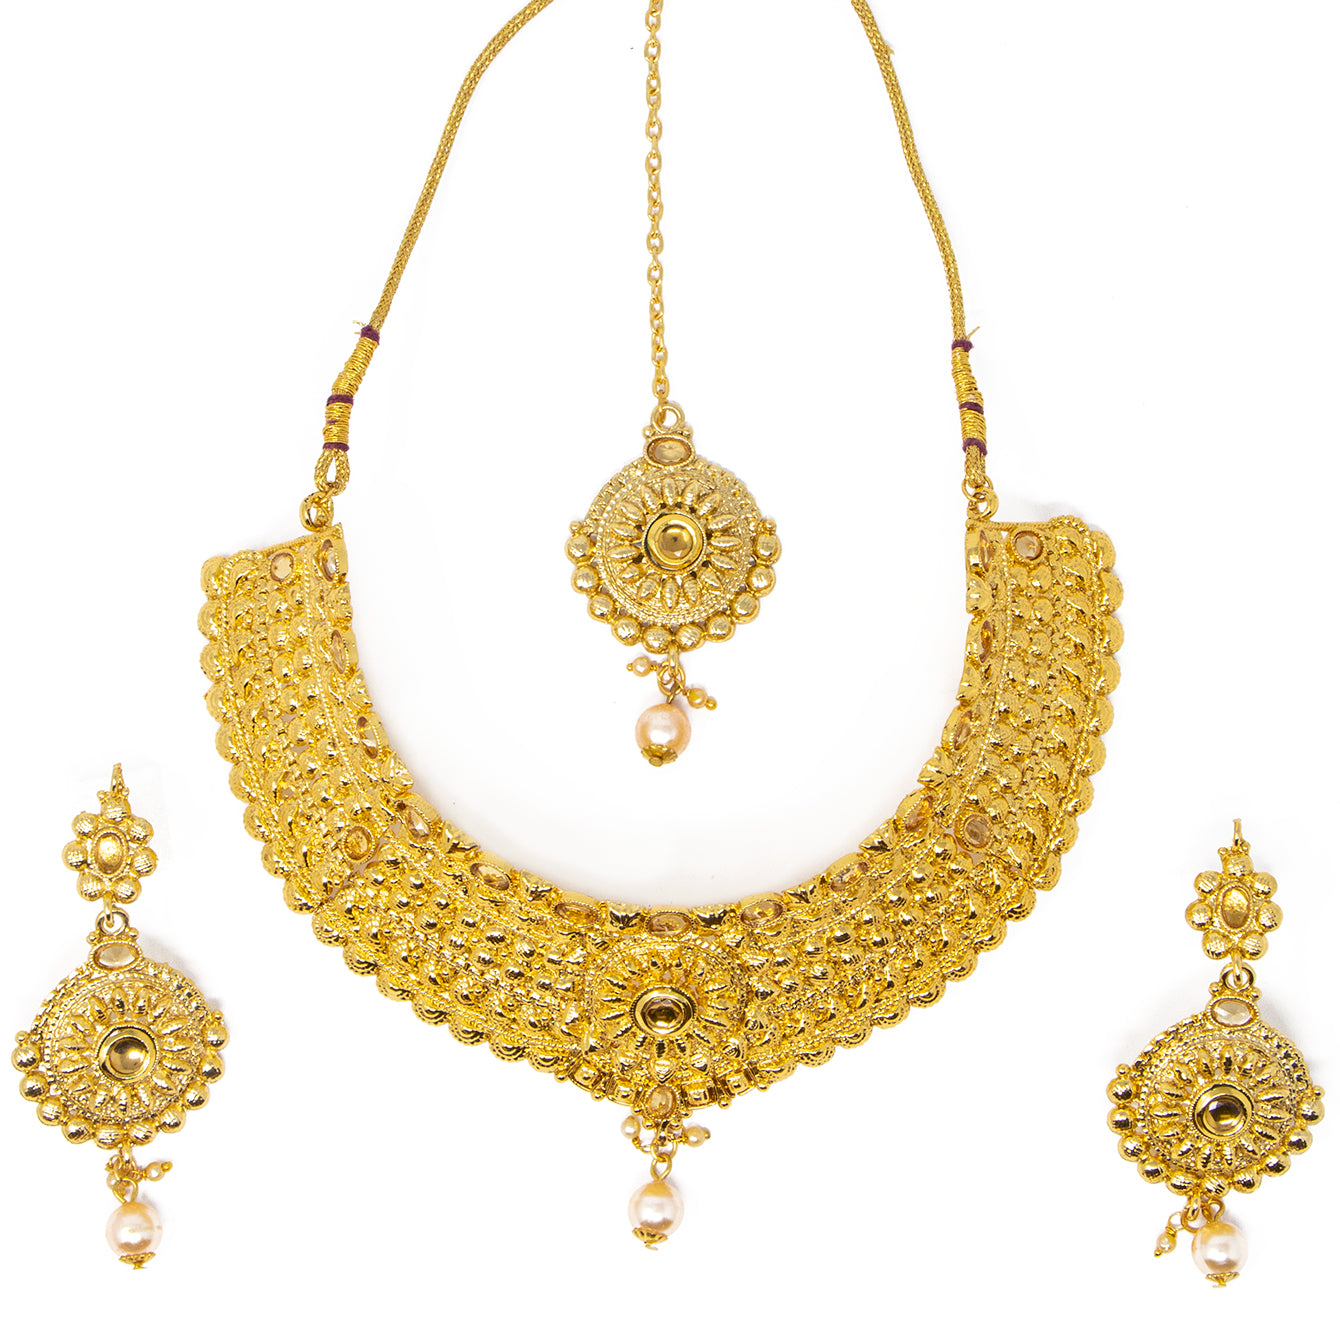 3 piece set Gold Necklace with earrings and bindi